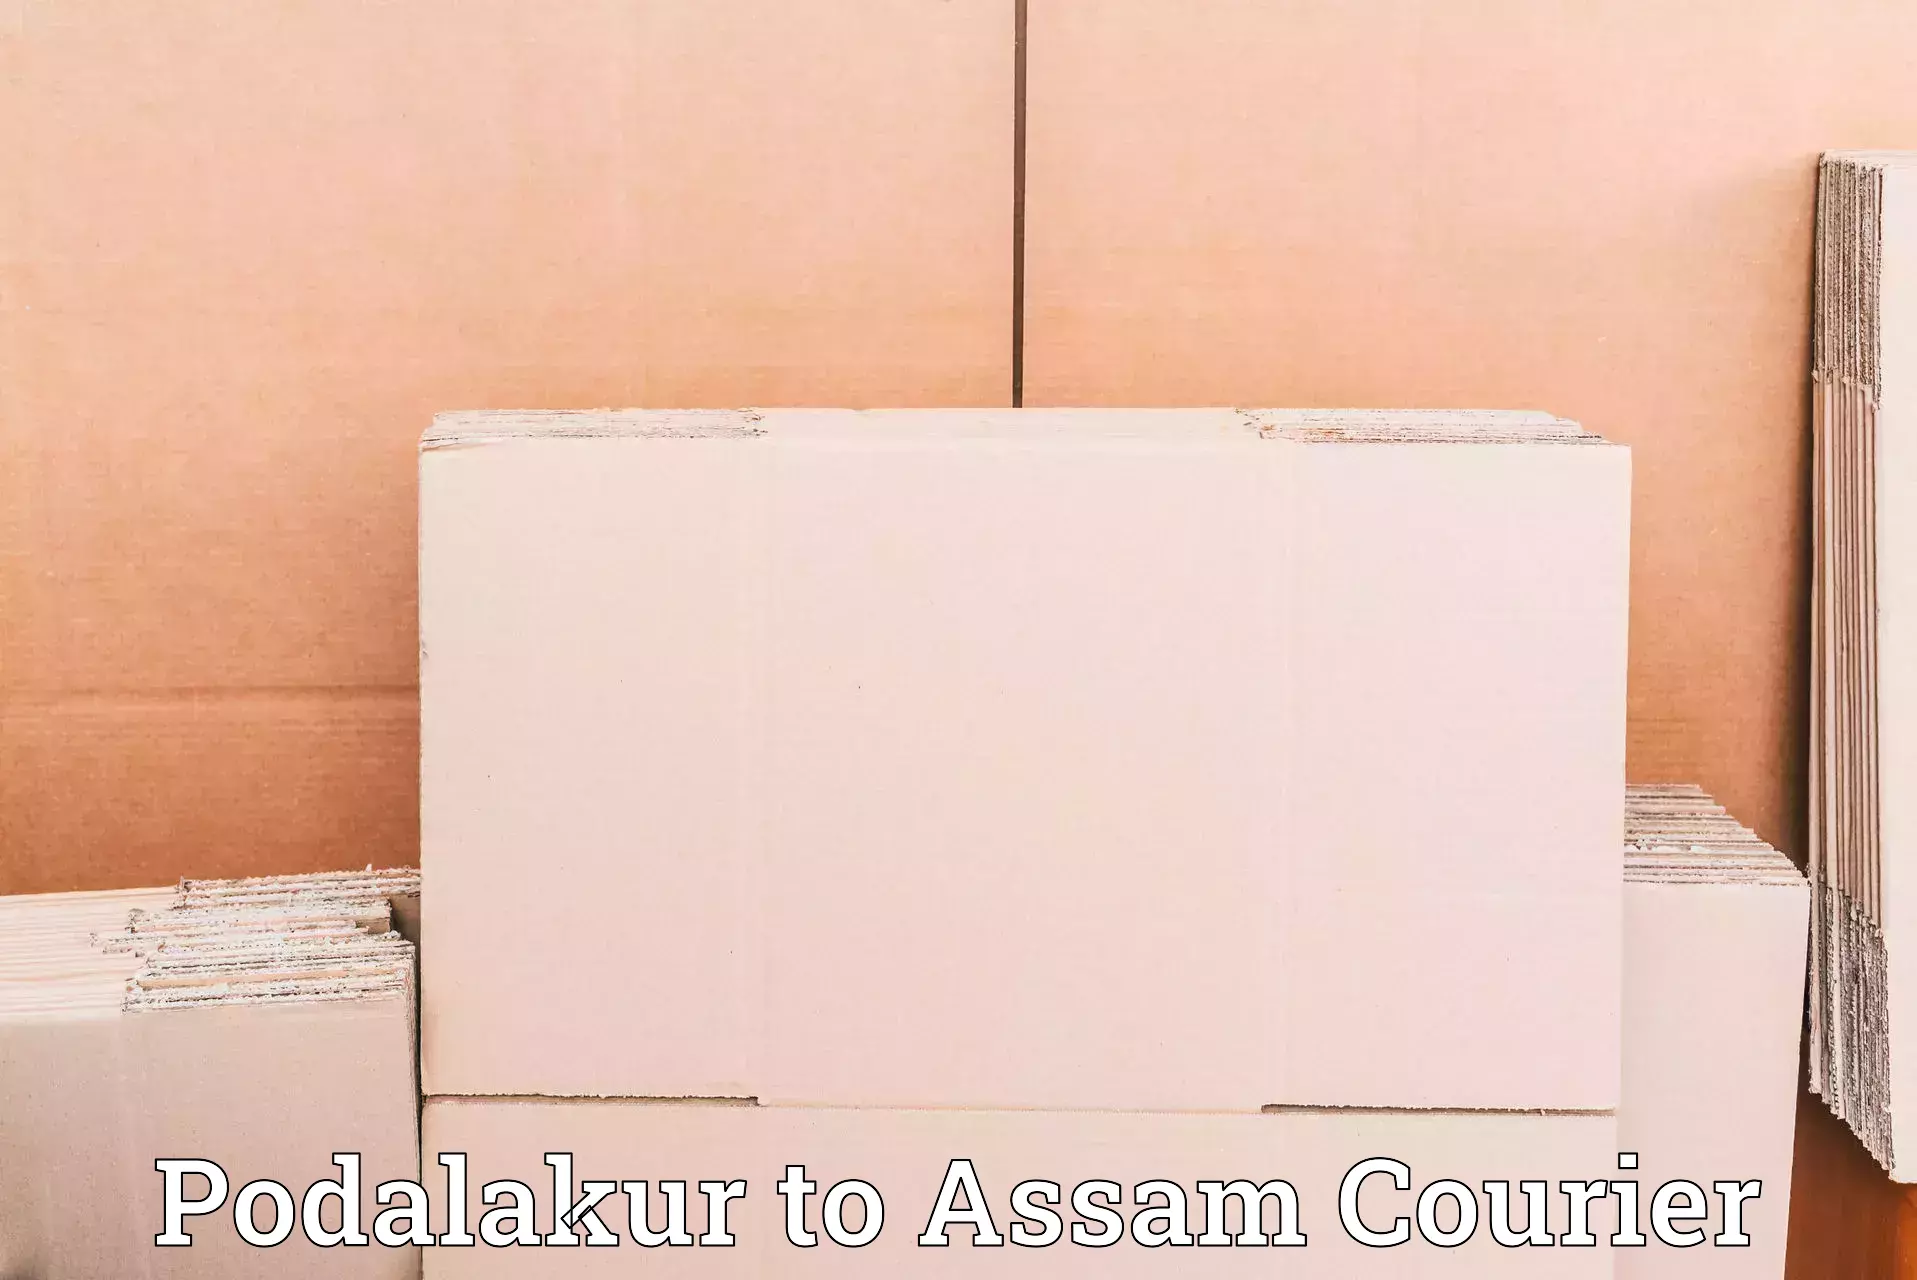 State-of-the-art courier technology Podalakur to Assam